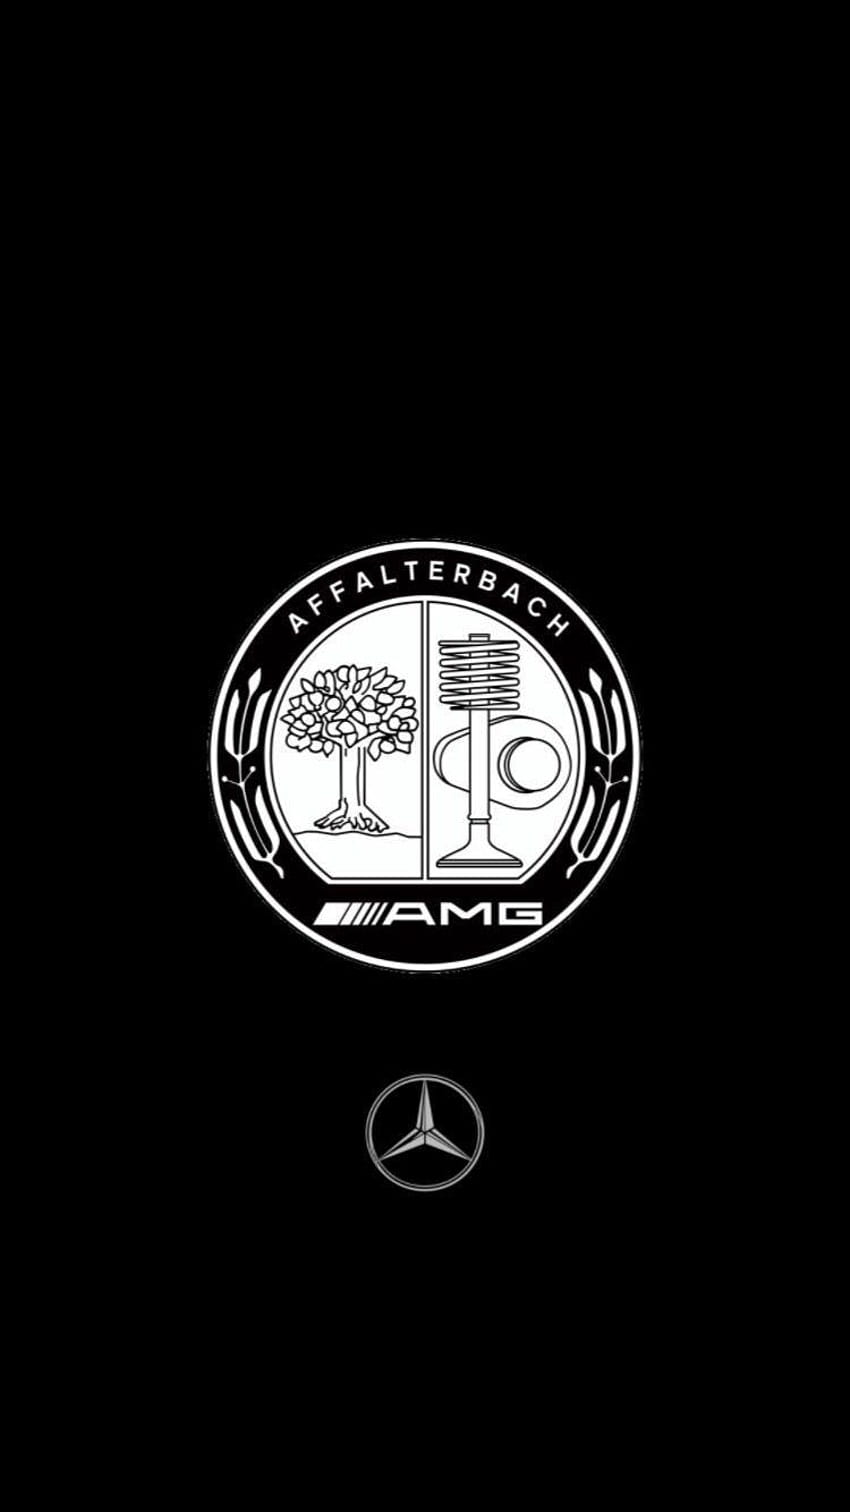 Mercedes Amg iPhone Desing by, mercedes benz amg logo iphone HD phone wallpaper